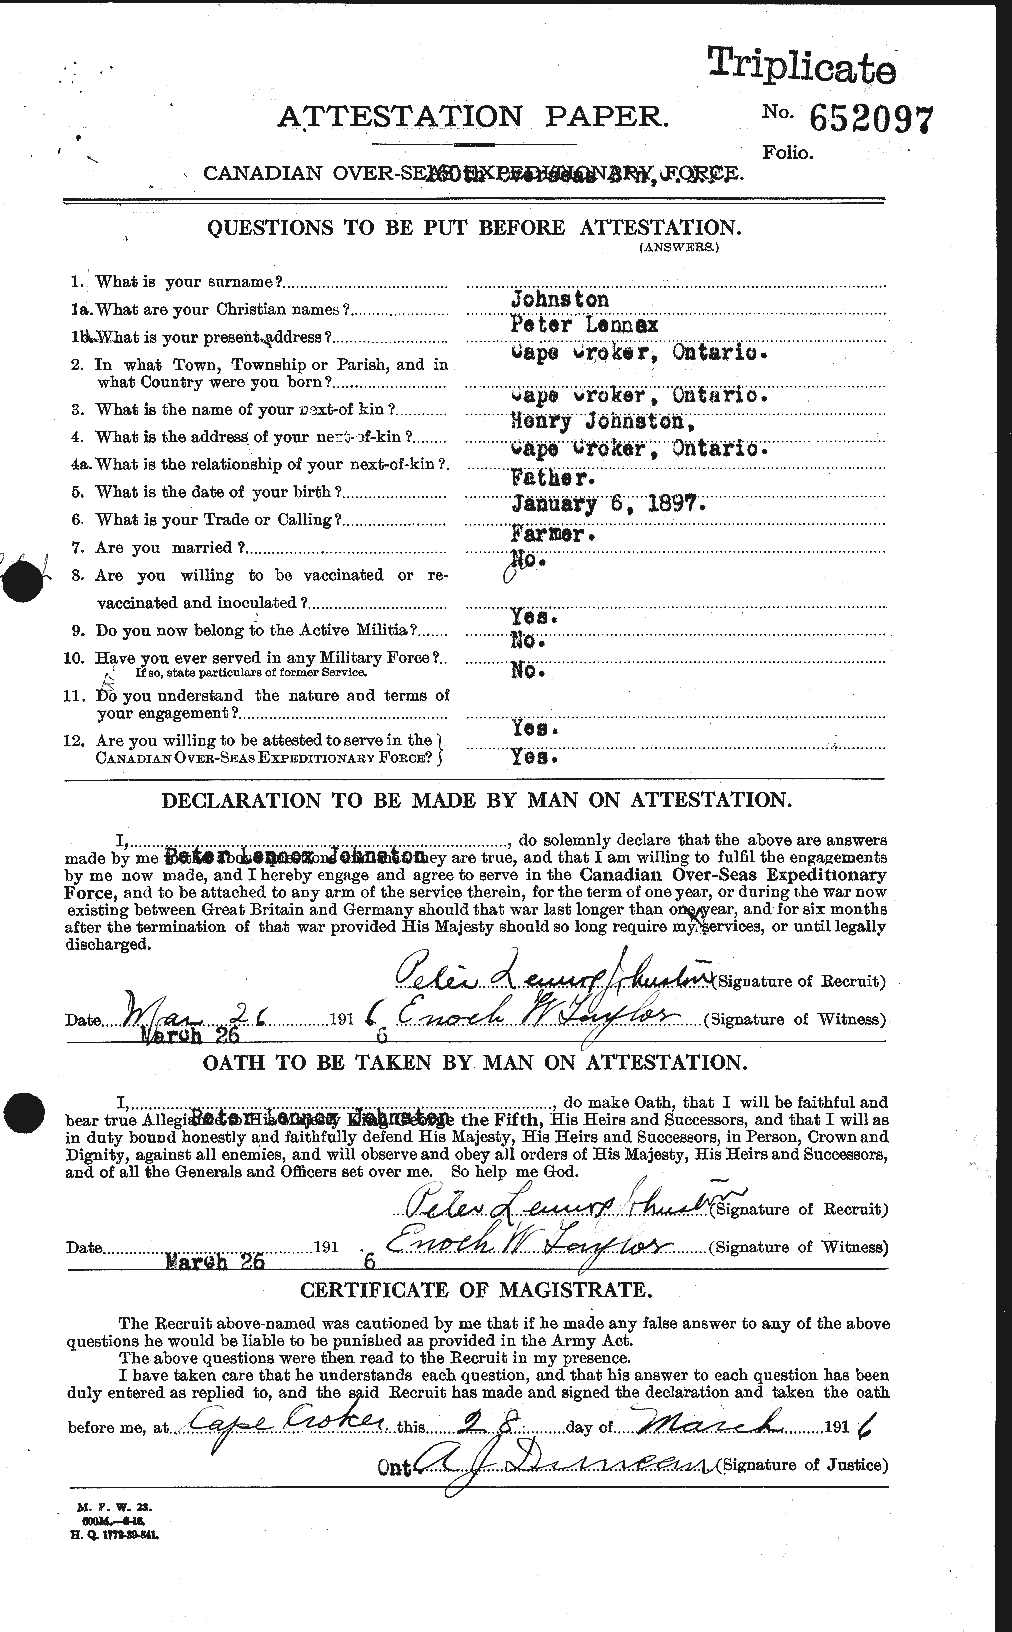 Personnel Records of the First World War - CEF 423045a